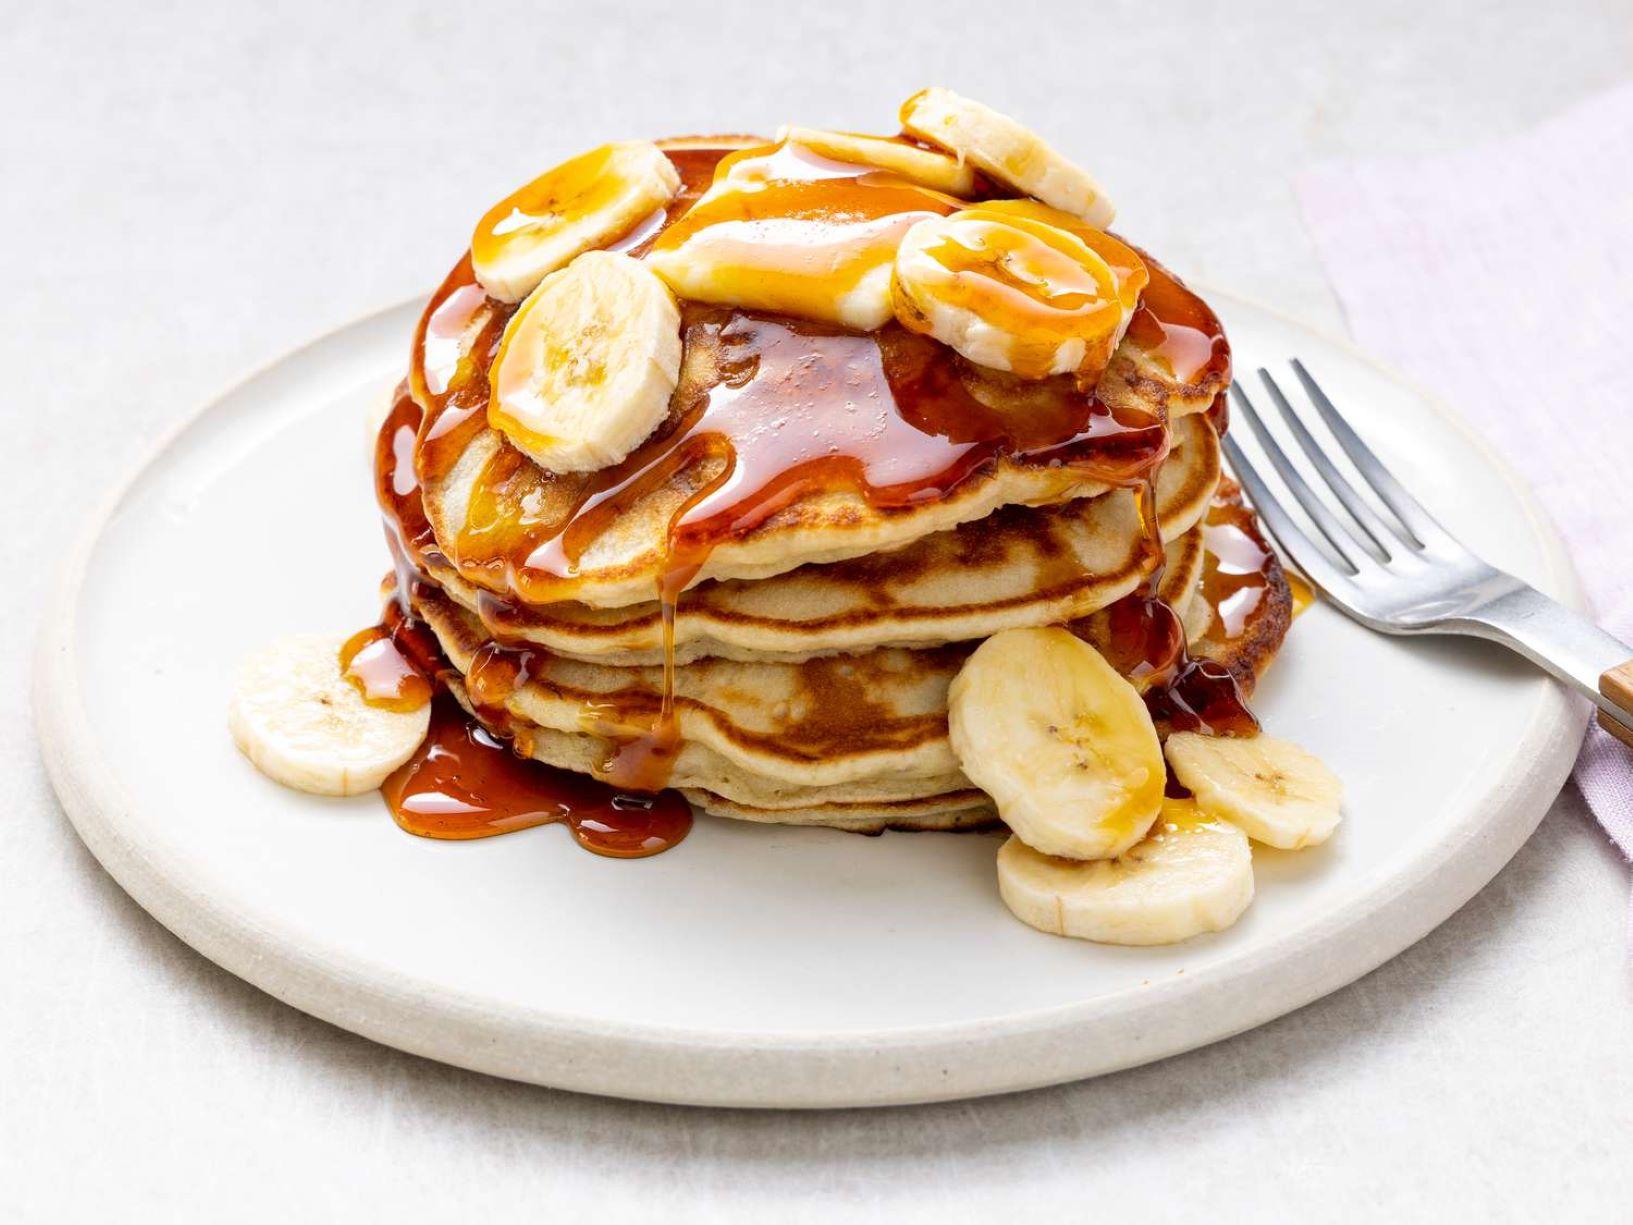 10 Banana Pancakes Nutrition Facts - Facts.net